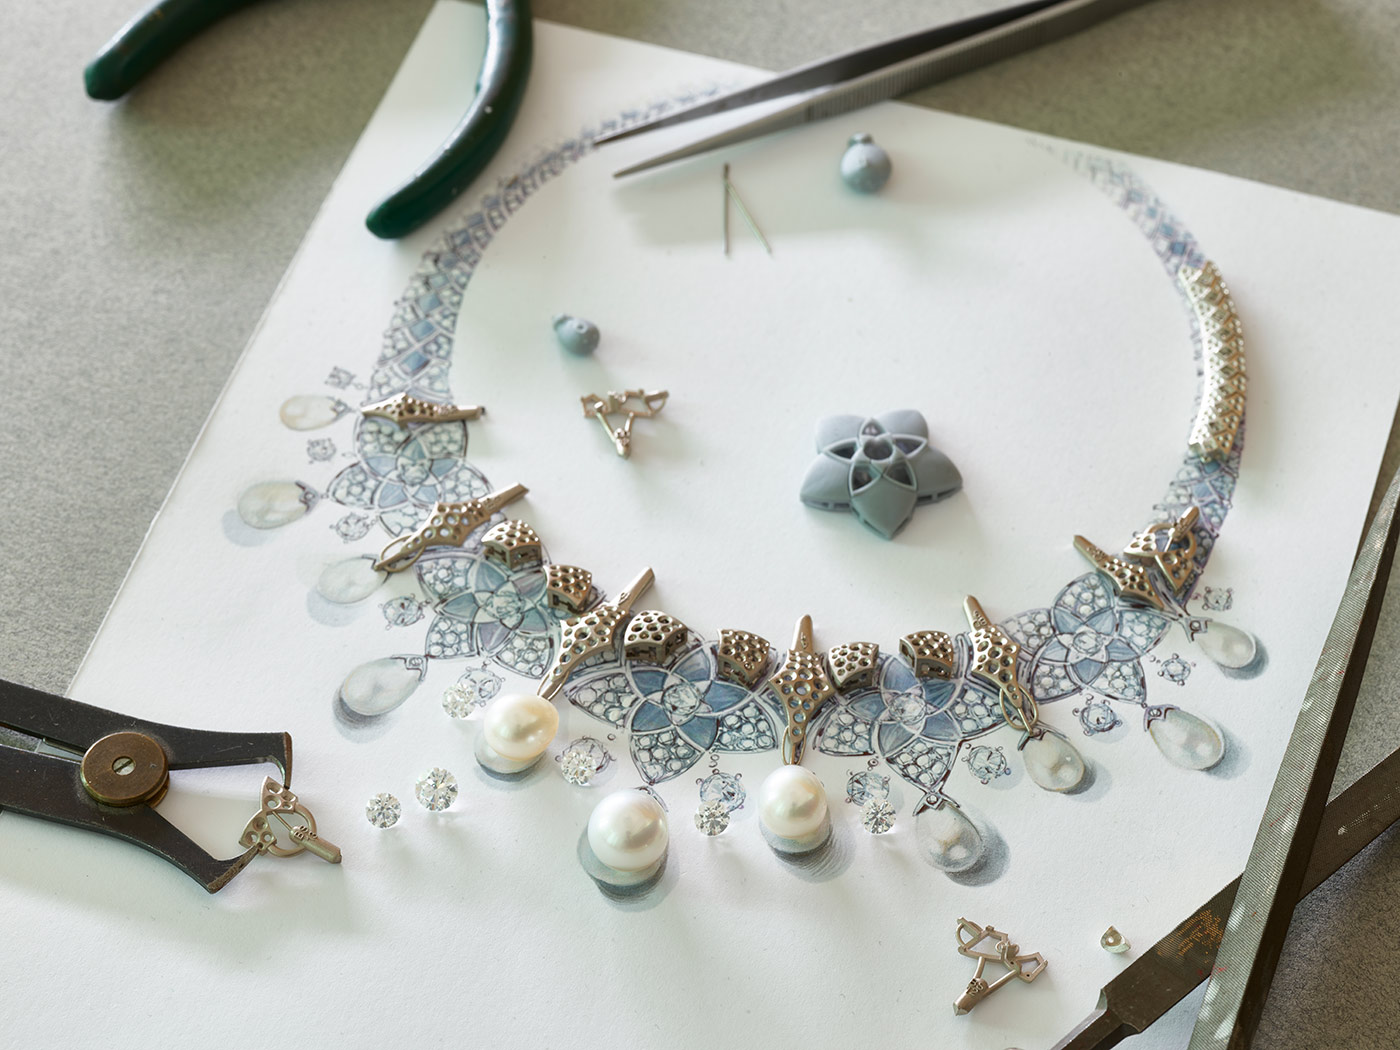 The making of the Bvlgari Jannah collection